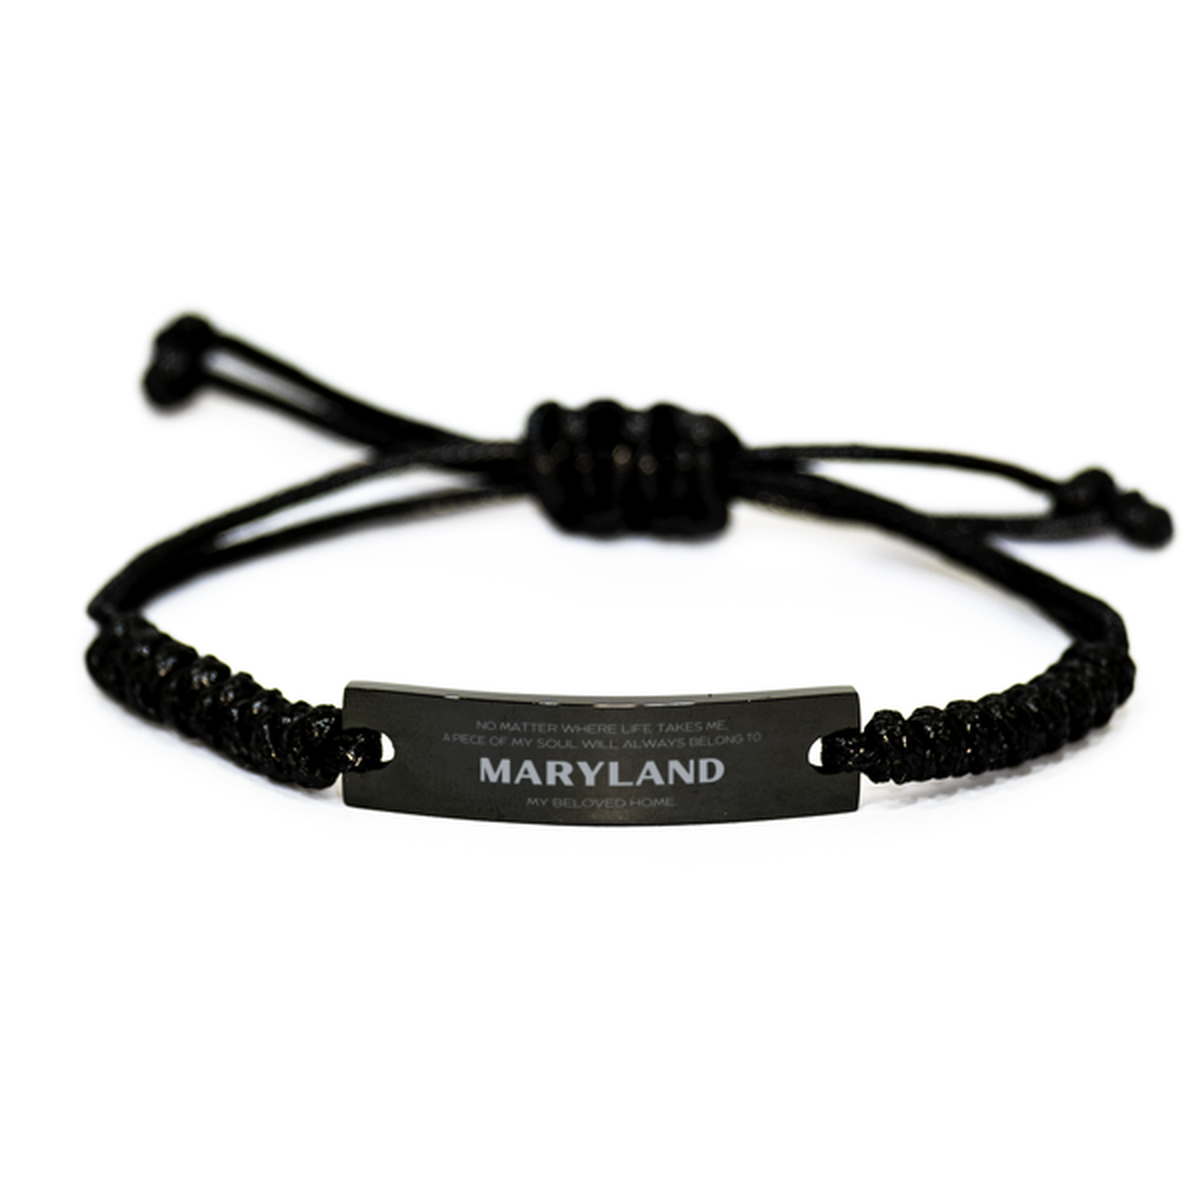 Love Maryland State Gifts, My soul will always belong to Maryland, Proud Black Rope Bracelet, Birthday Unique Gifts For Maryland Men, Women, Friends